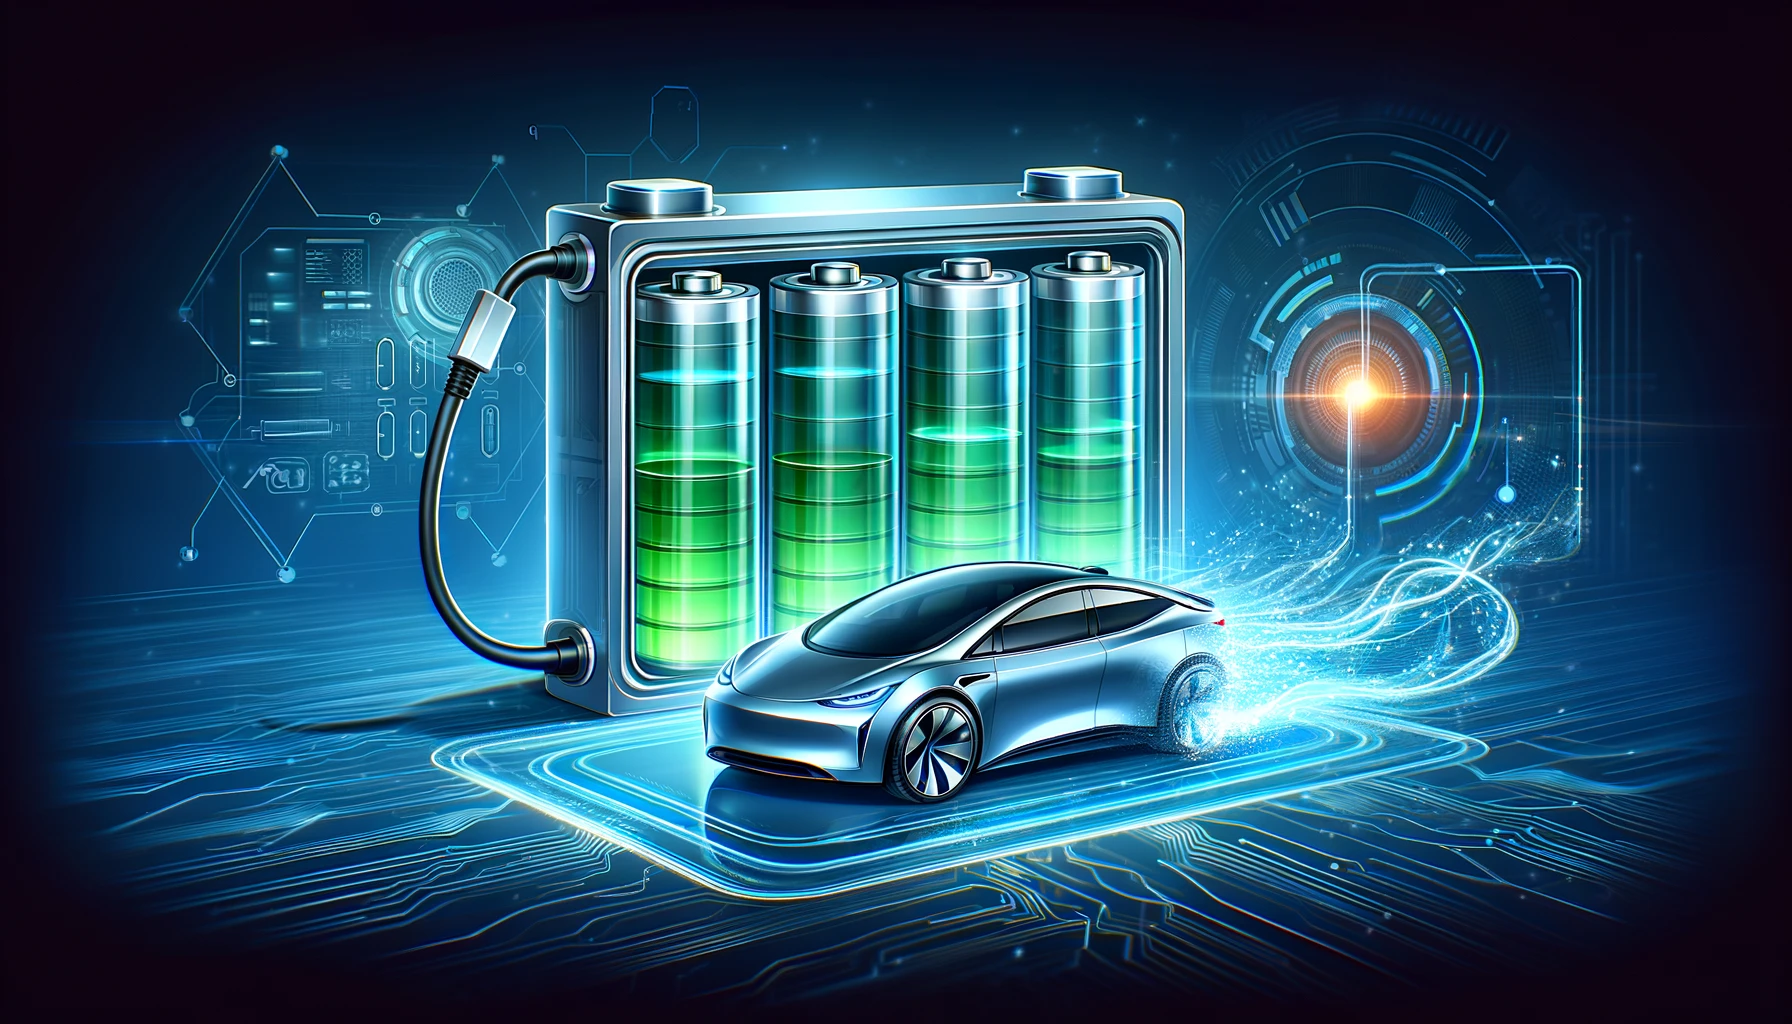 Electric Vehicles are Driving Innovation in Battery Technology and the Energy Industry